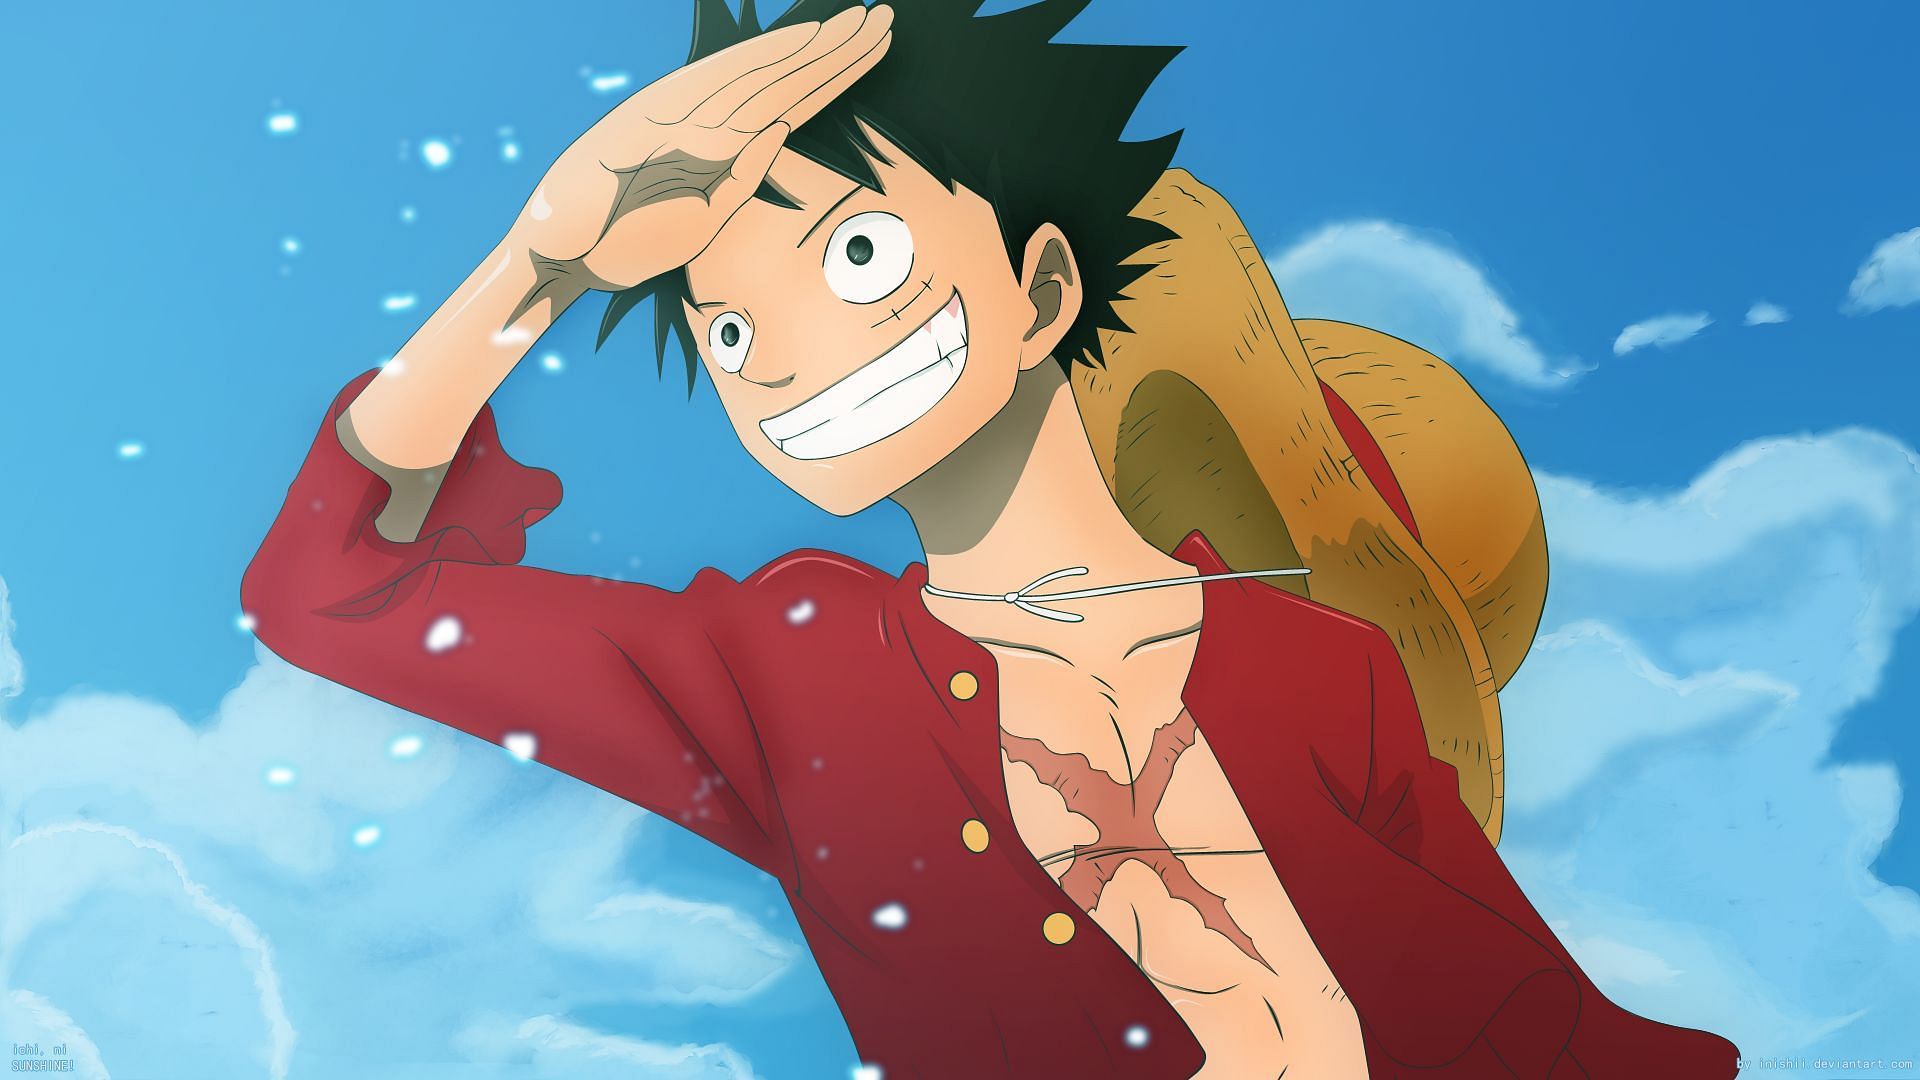 One Piece Rival Anime Won't Even Reveal Name and Gender to Fans Despite  Being 9th Best Selling Manga of All Time With $8.74B Franchise Value -  FandomWire